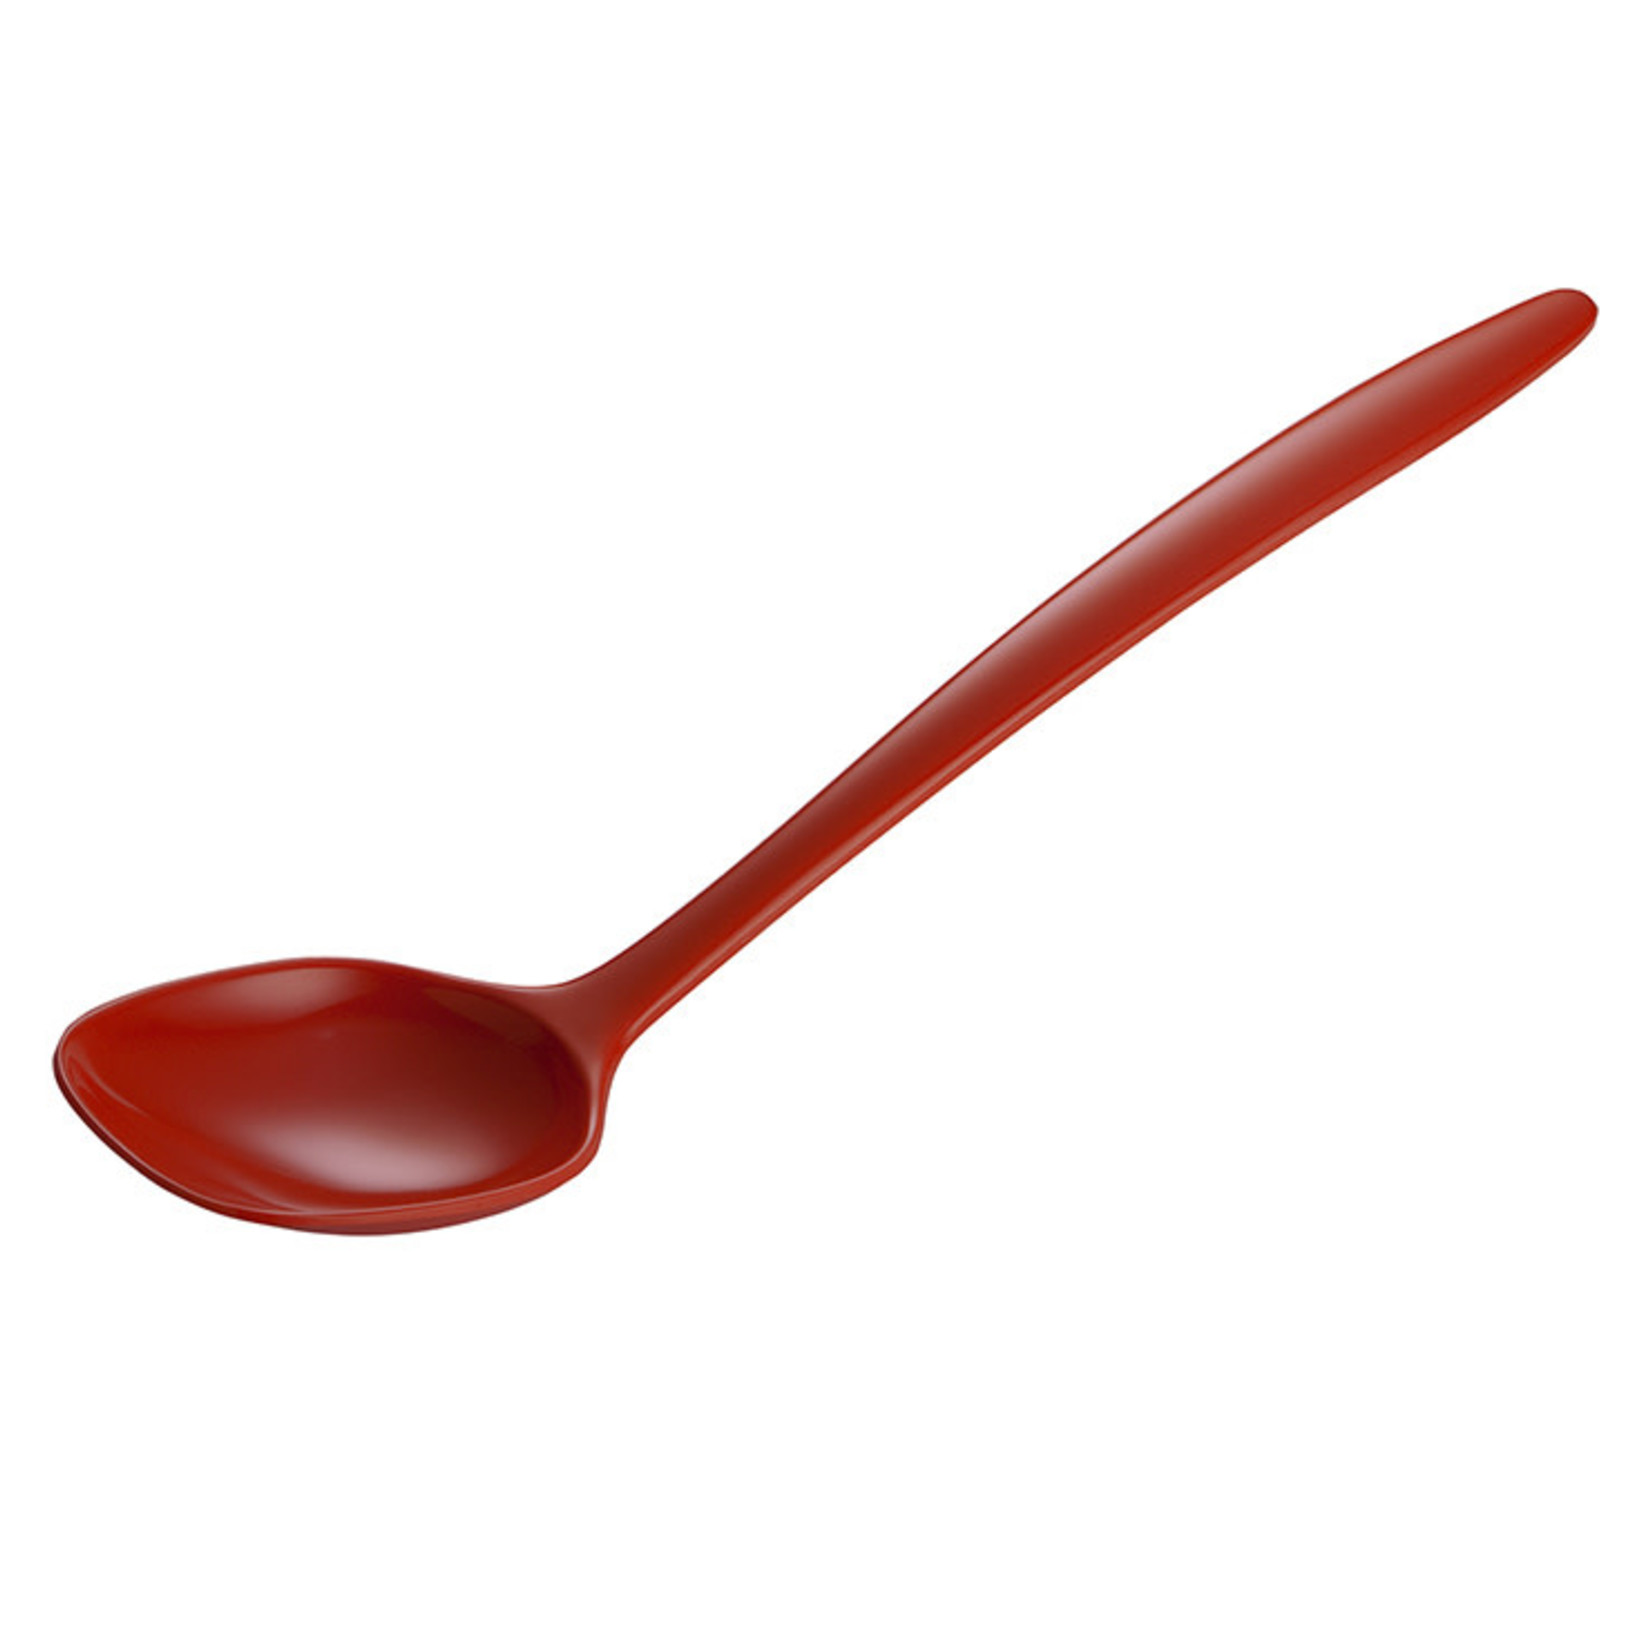 TWS 12" ASSORTED COLOR MIXING SPOON